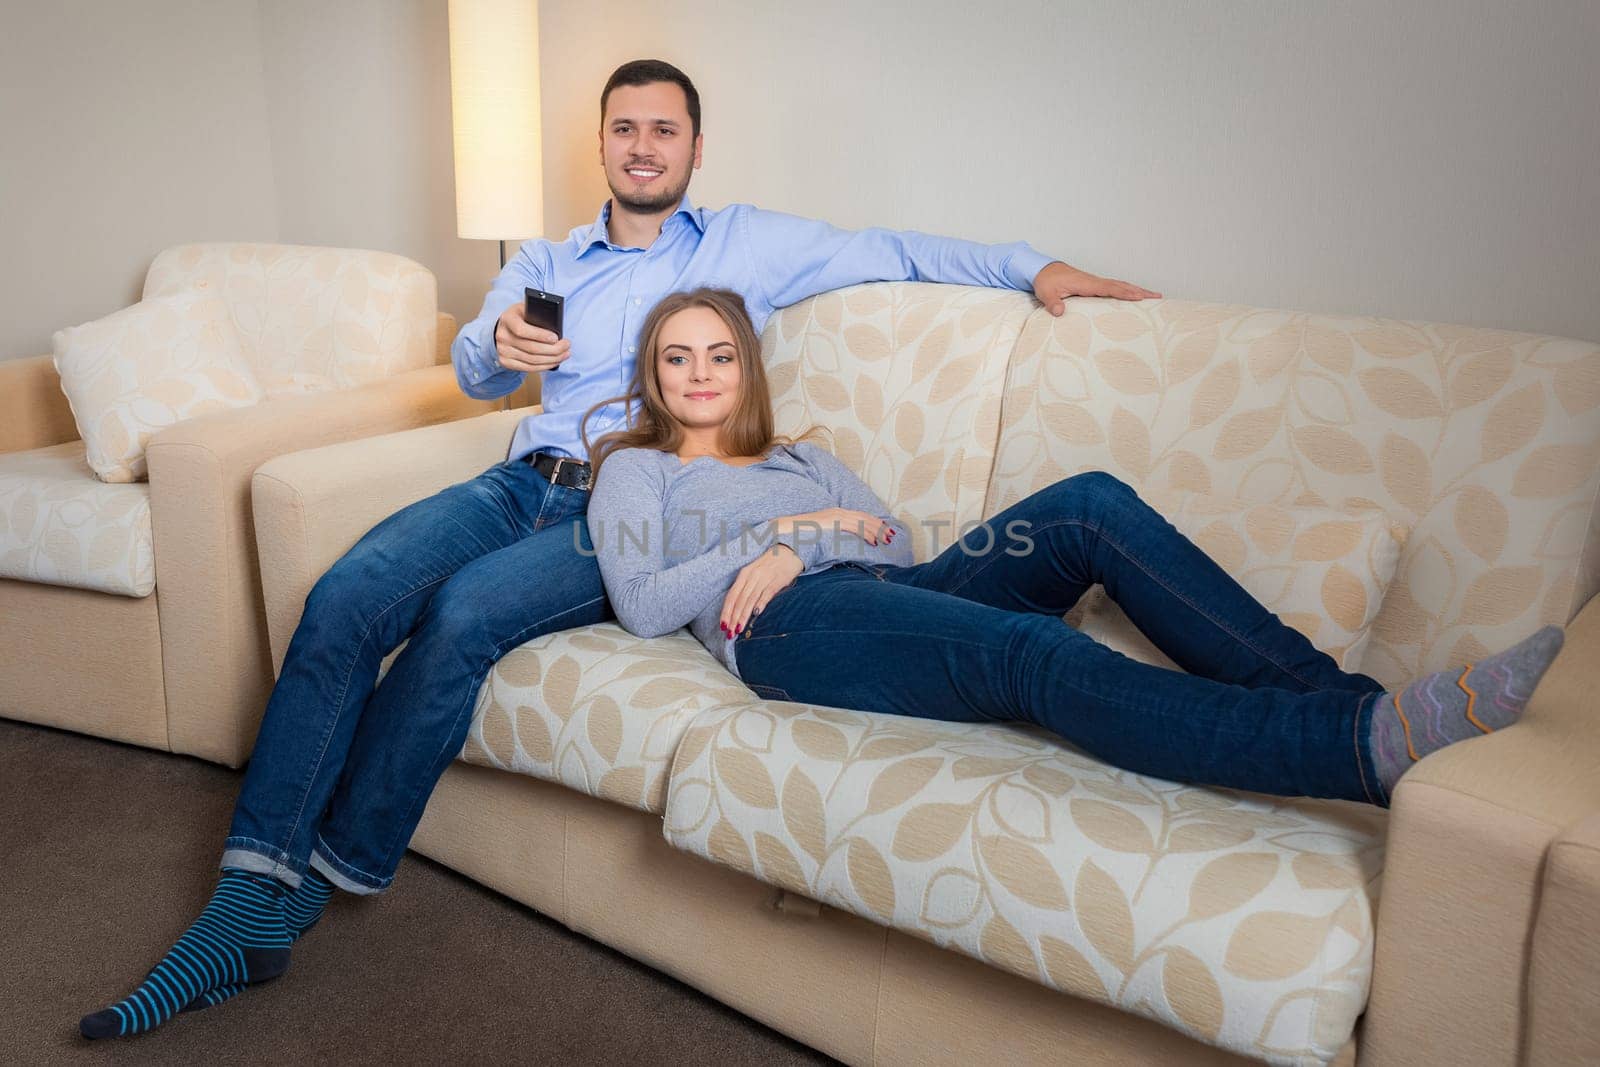 Portrait of happy couple sitting on sofa with remote control in hands and watching television together